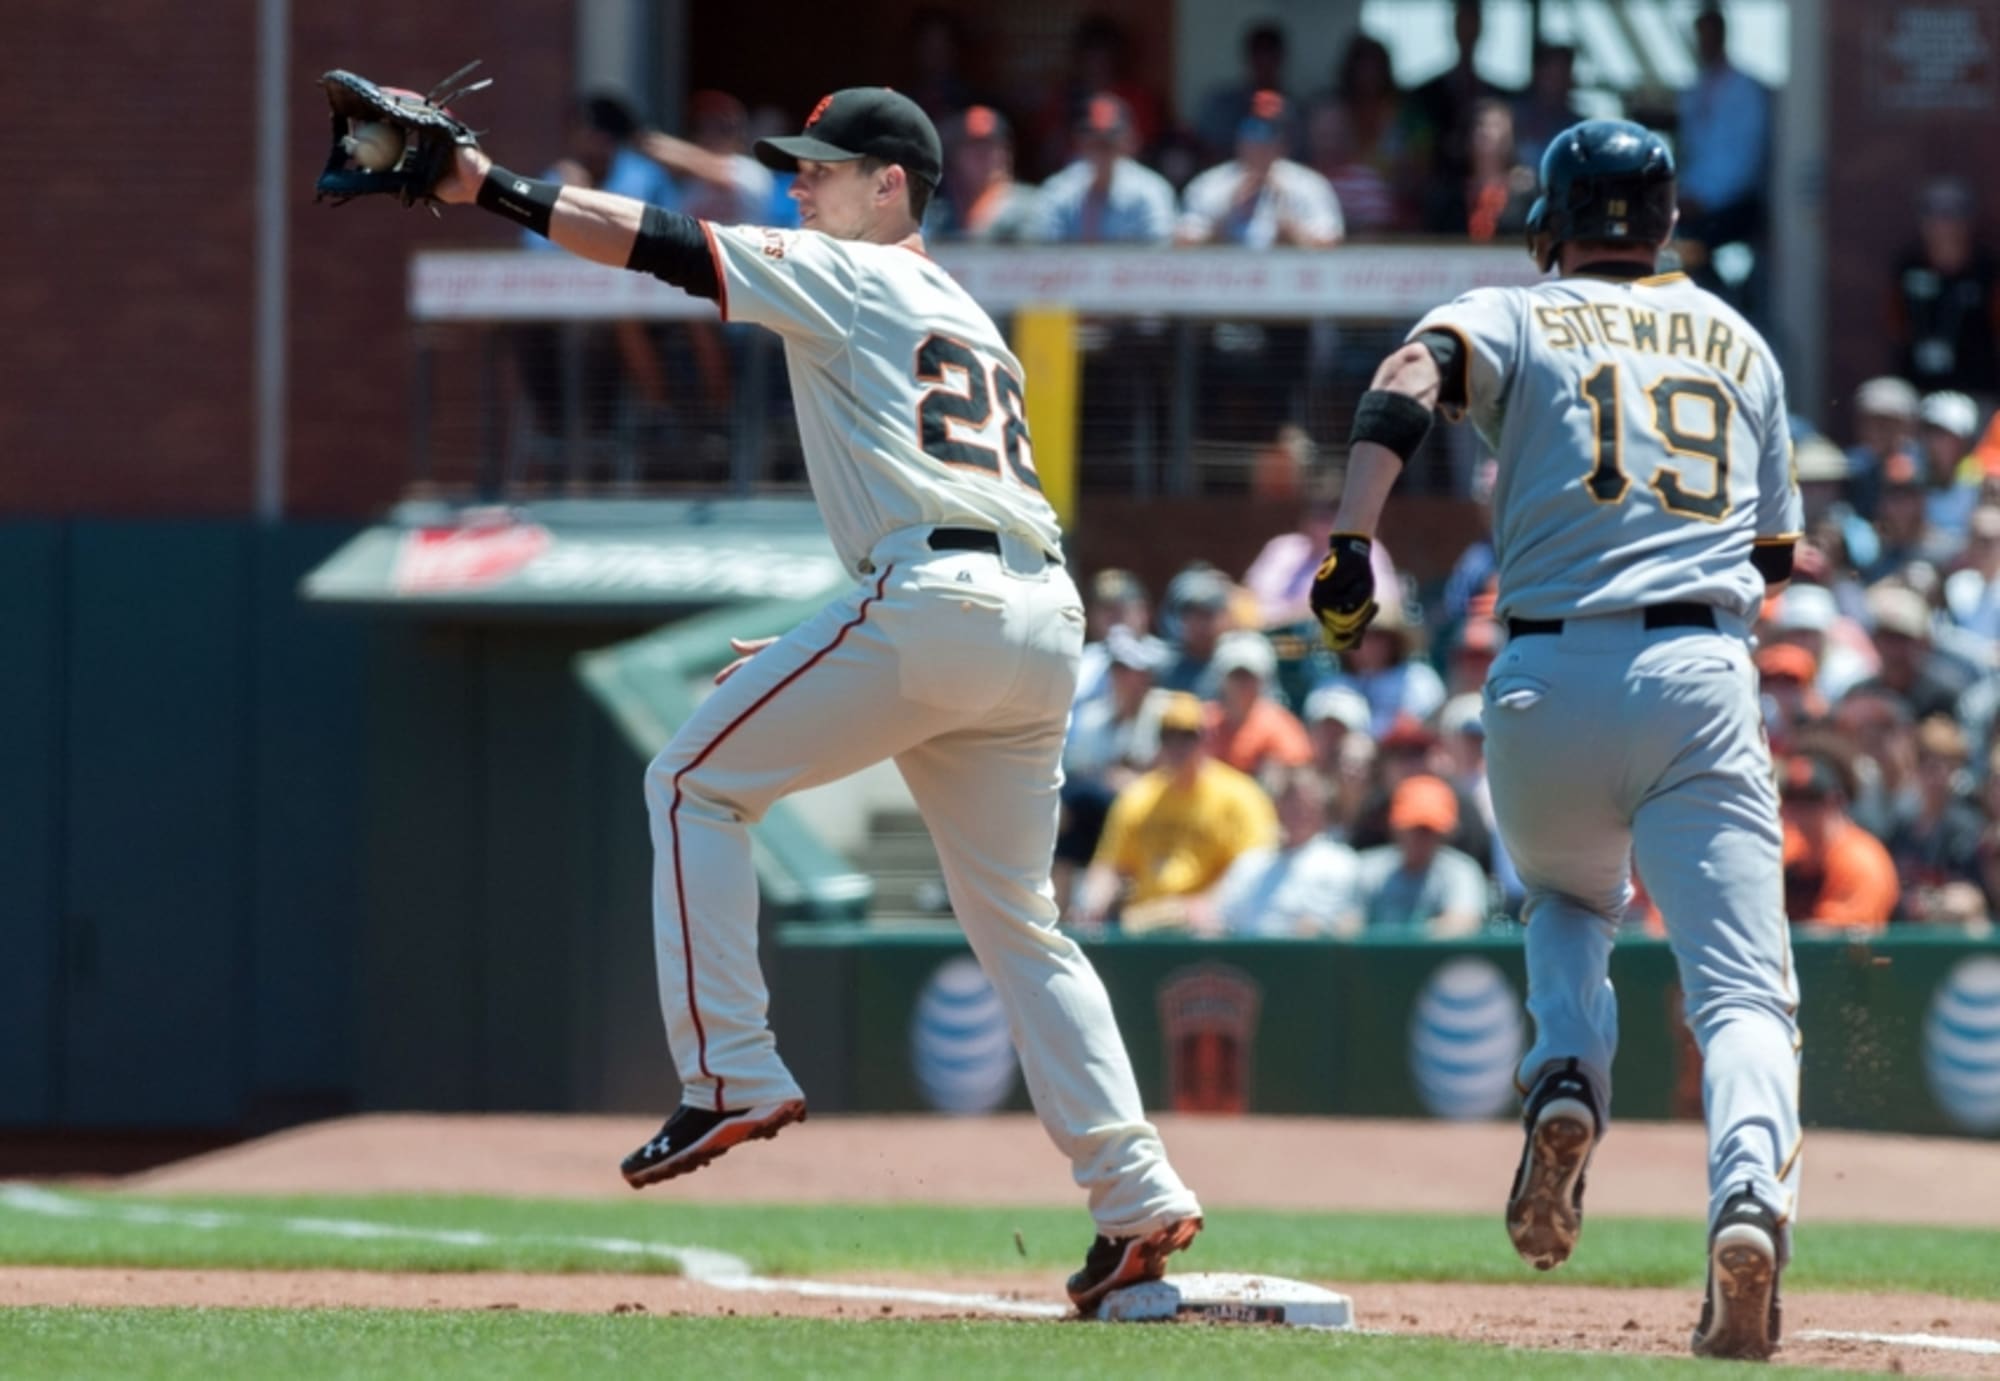 San Francisco Giants rumors Buster Posey could move to first base at